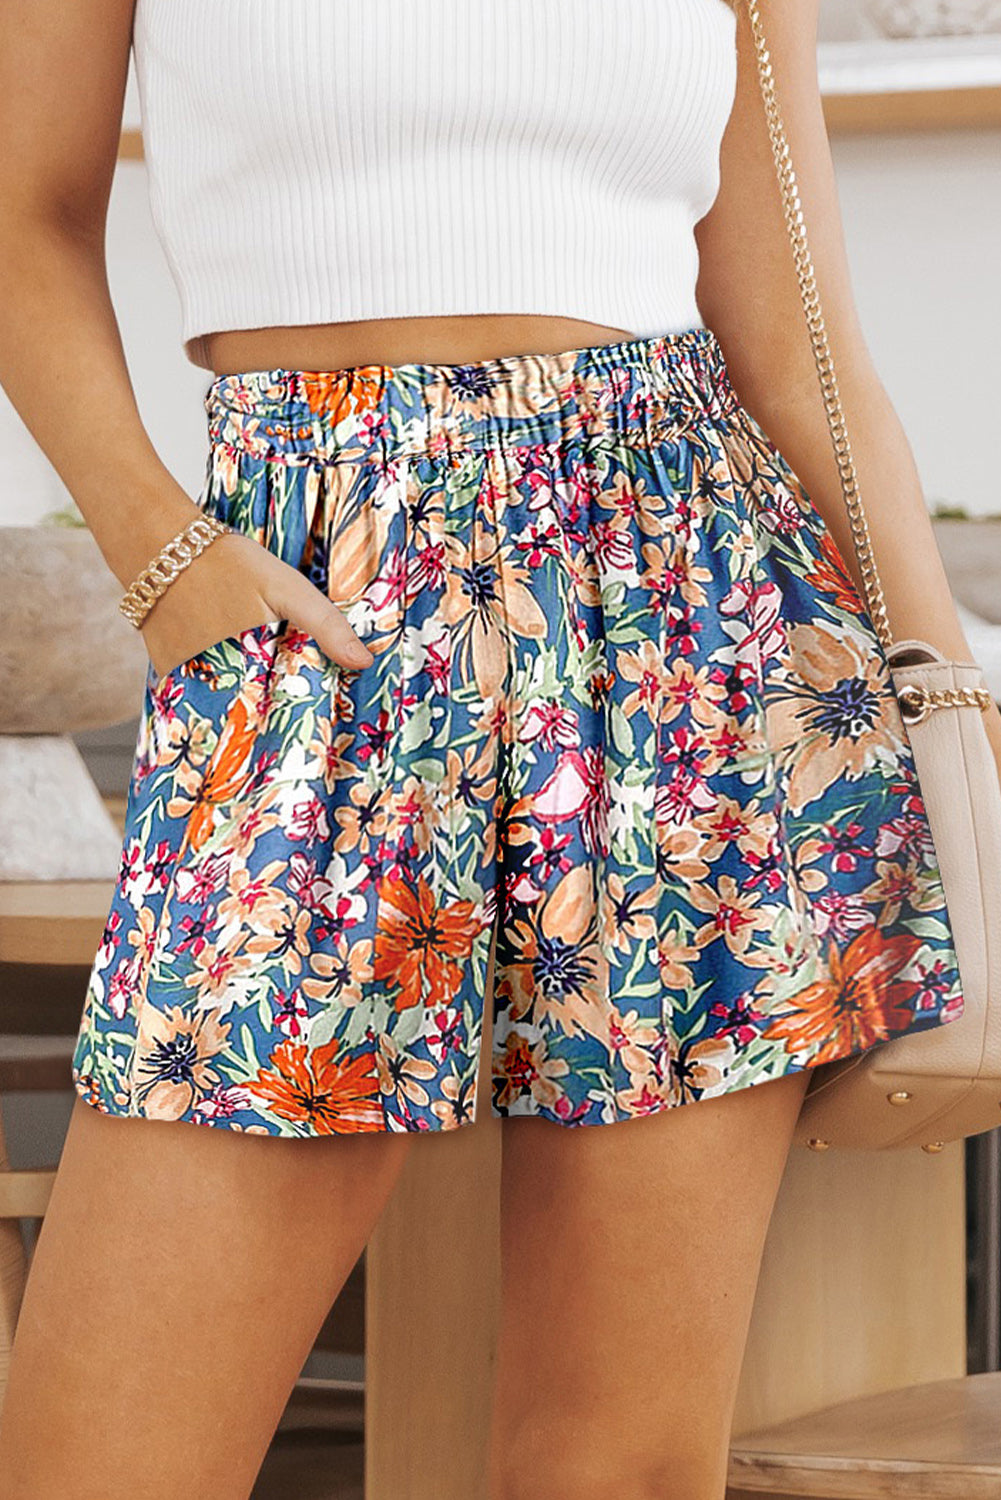 Stylish Floral High Waist Shorts with pockets perfect for summer. Light fabric, vibrant colors, and versatile design for any occasion.